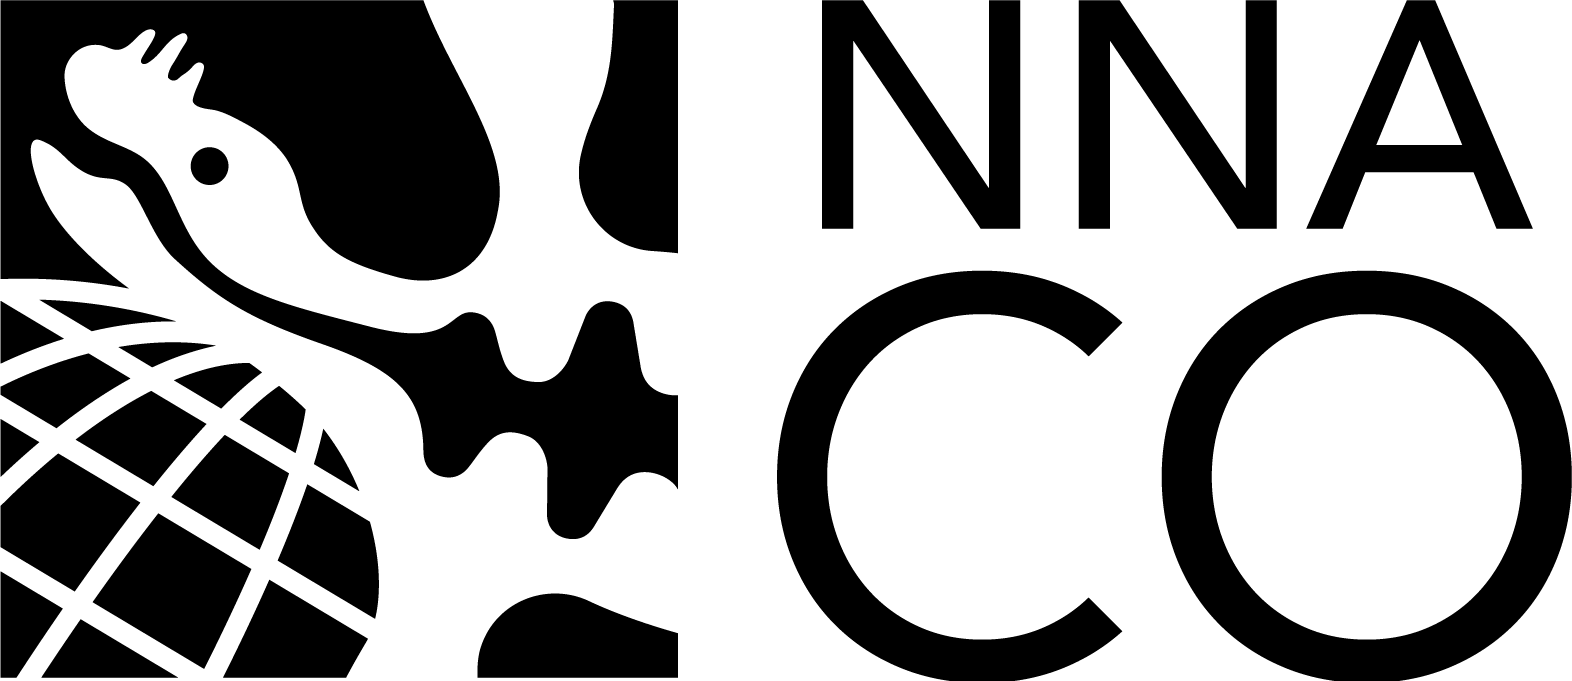 A logo with the initials &quot;NNA CO&quot; in black next to a stylized illustration of a seal